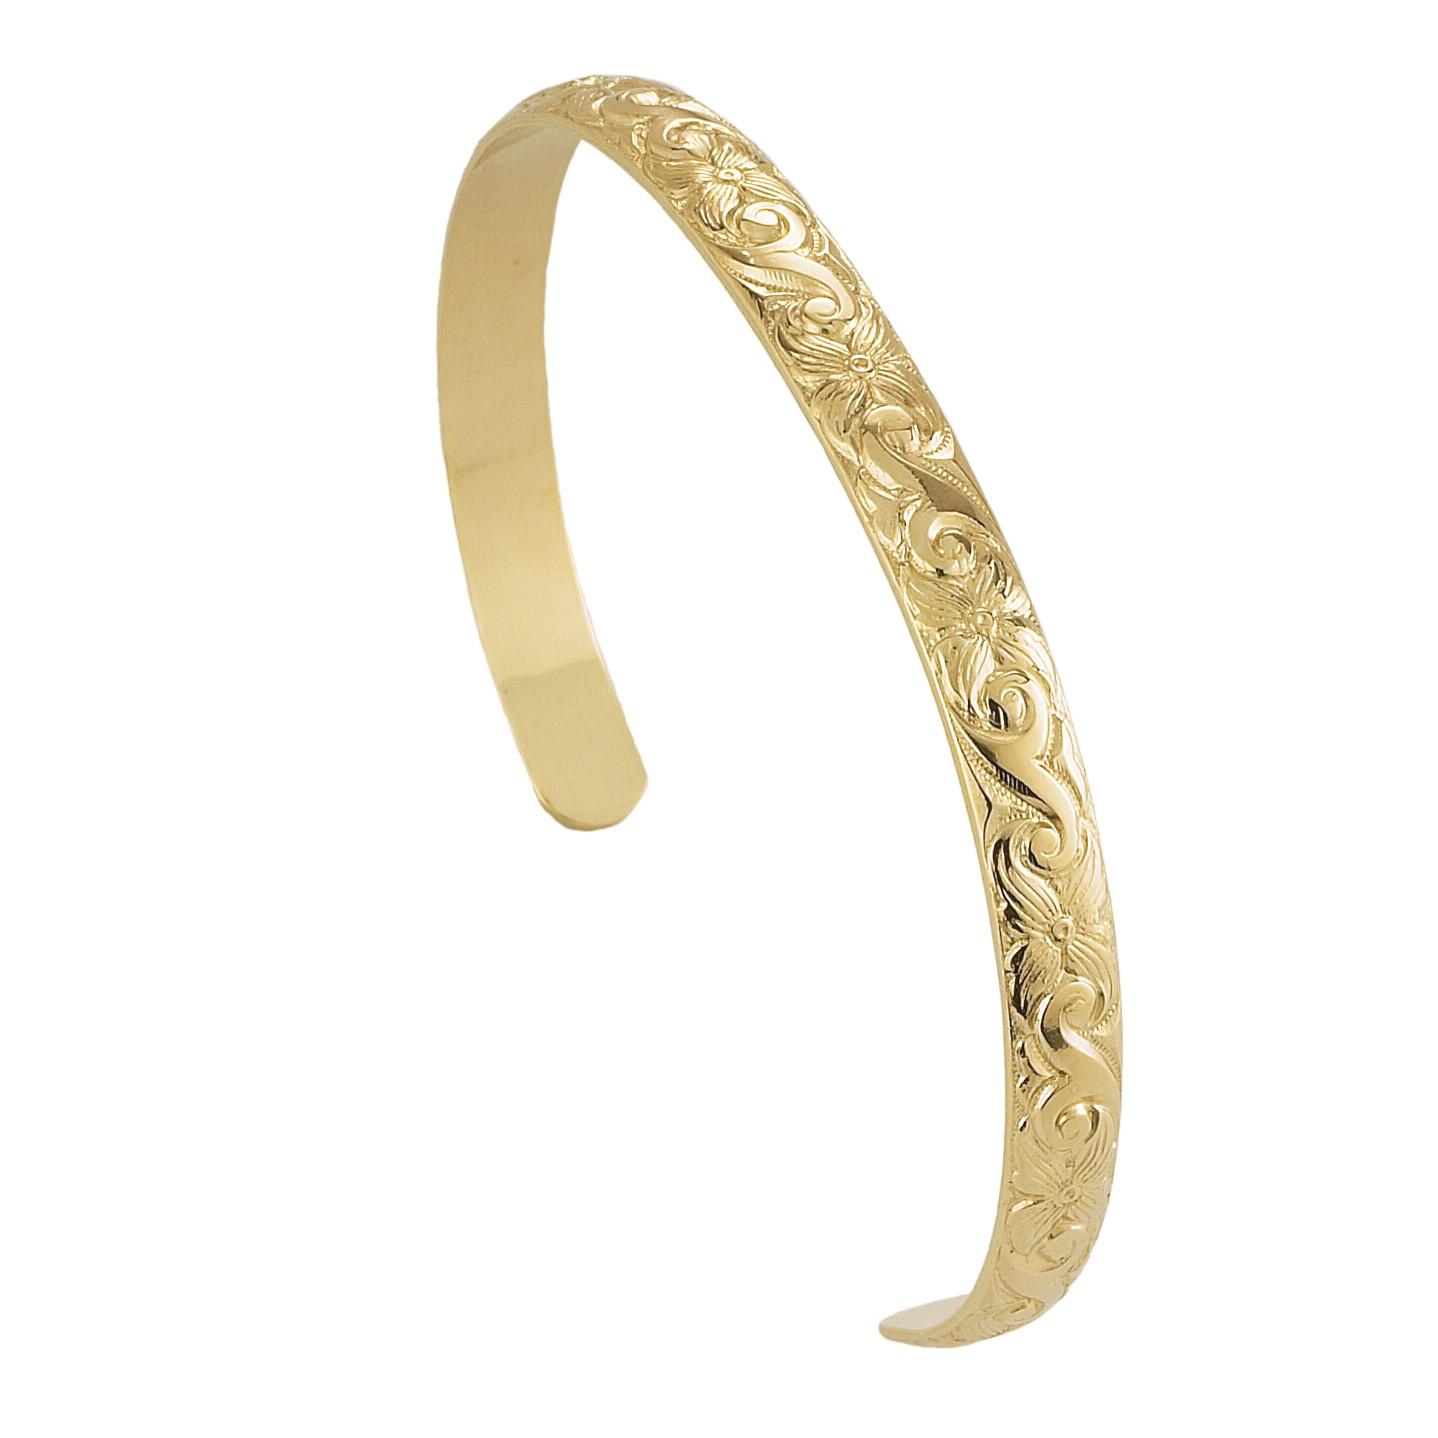 WHITE GOLD HINGED BANGLE BRACELET - COMPARE PRICES, REVIEWS AND